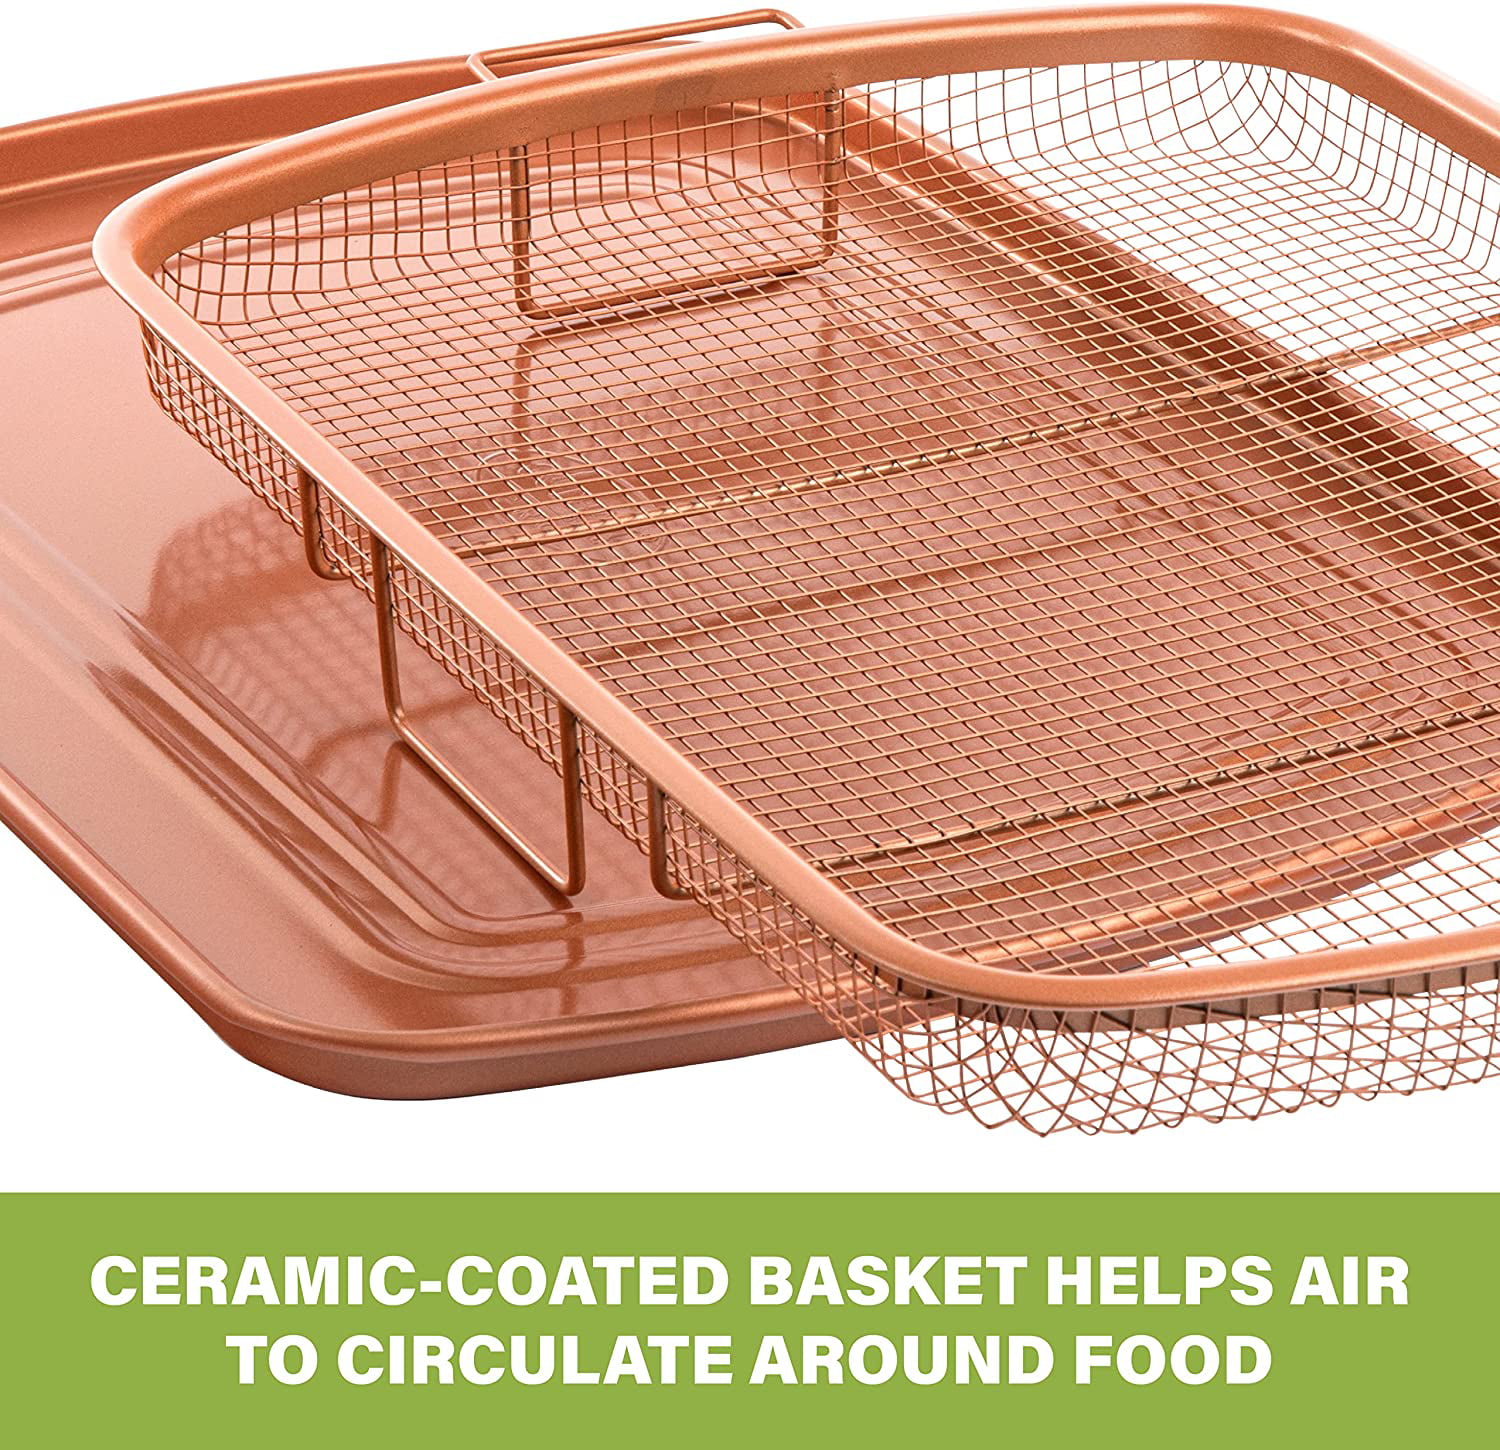 Gotham Steel Crisper Tray for Oven, 2 Piece Nonstick Copper Crisper Tray  and Basket, Air Fry in your Oven, Great for Baking and Crispy Foods, As  Seen